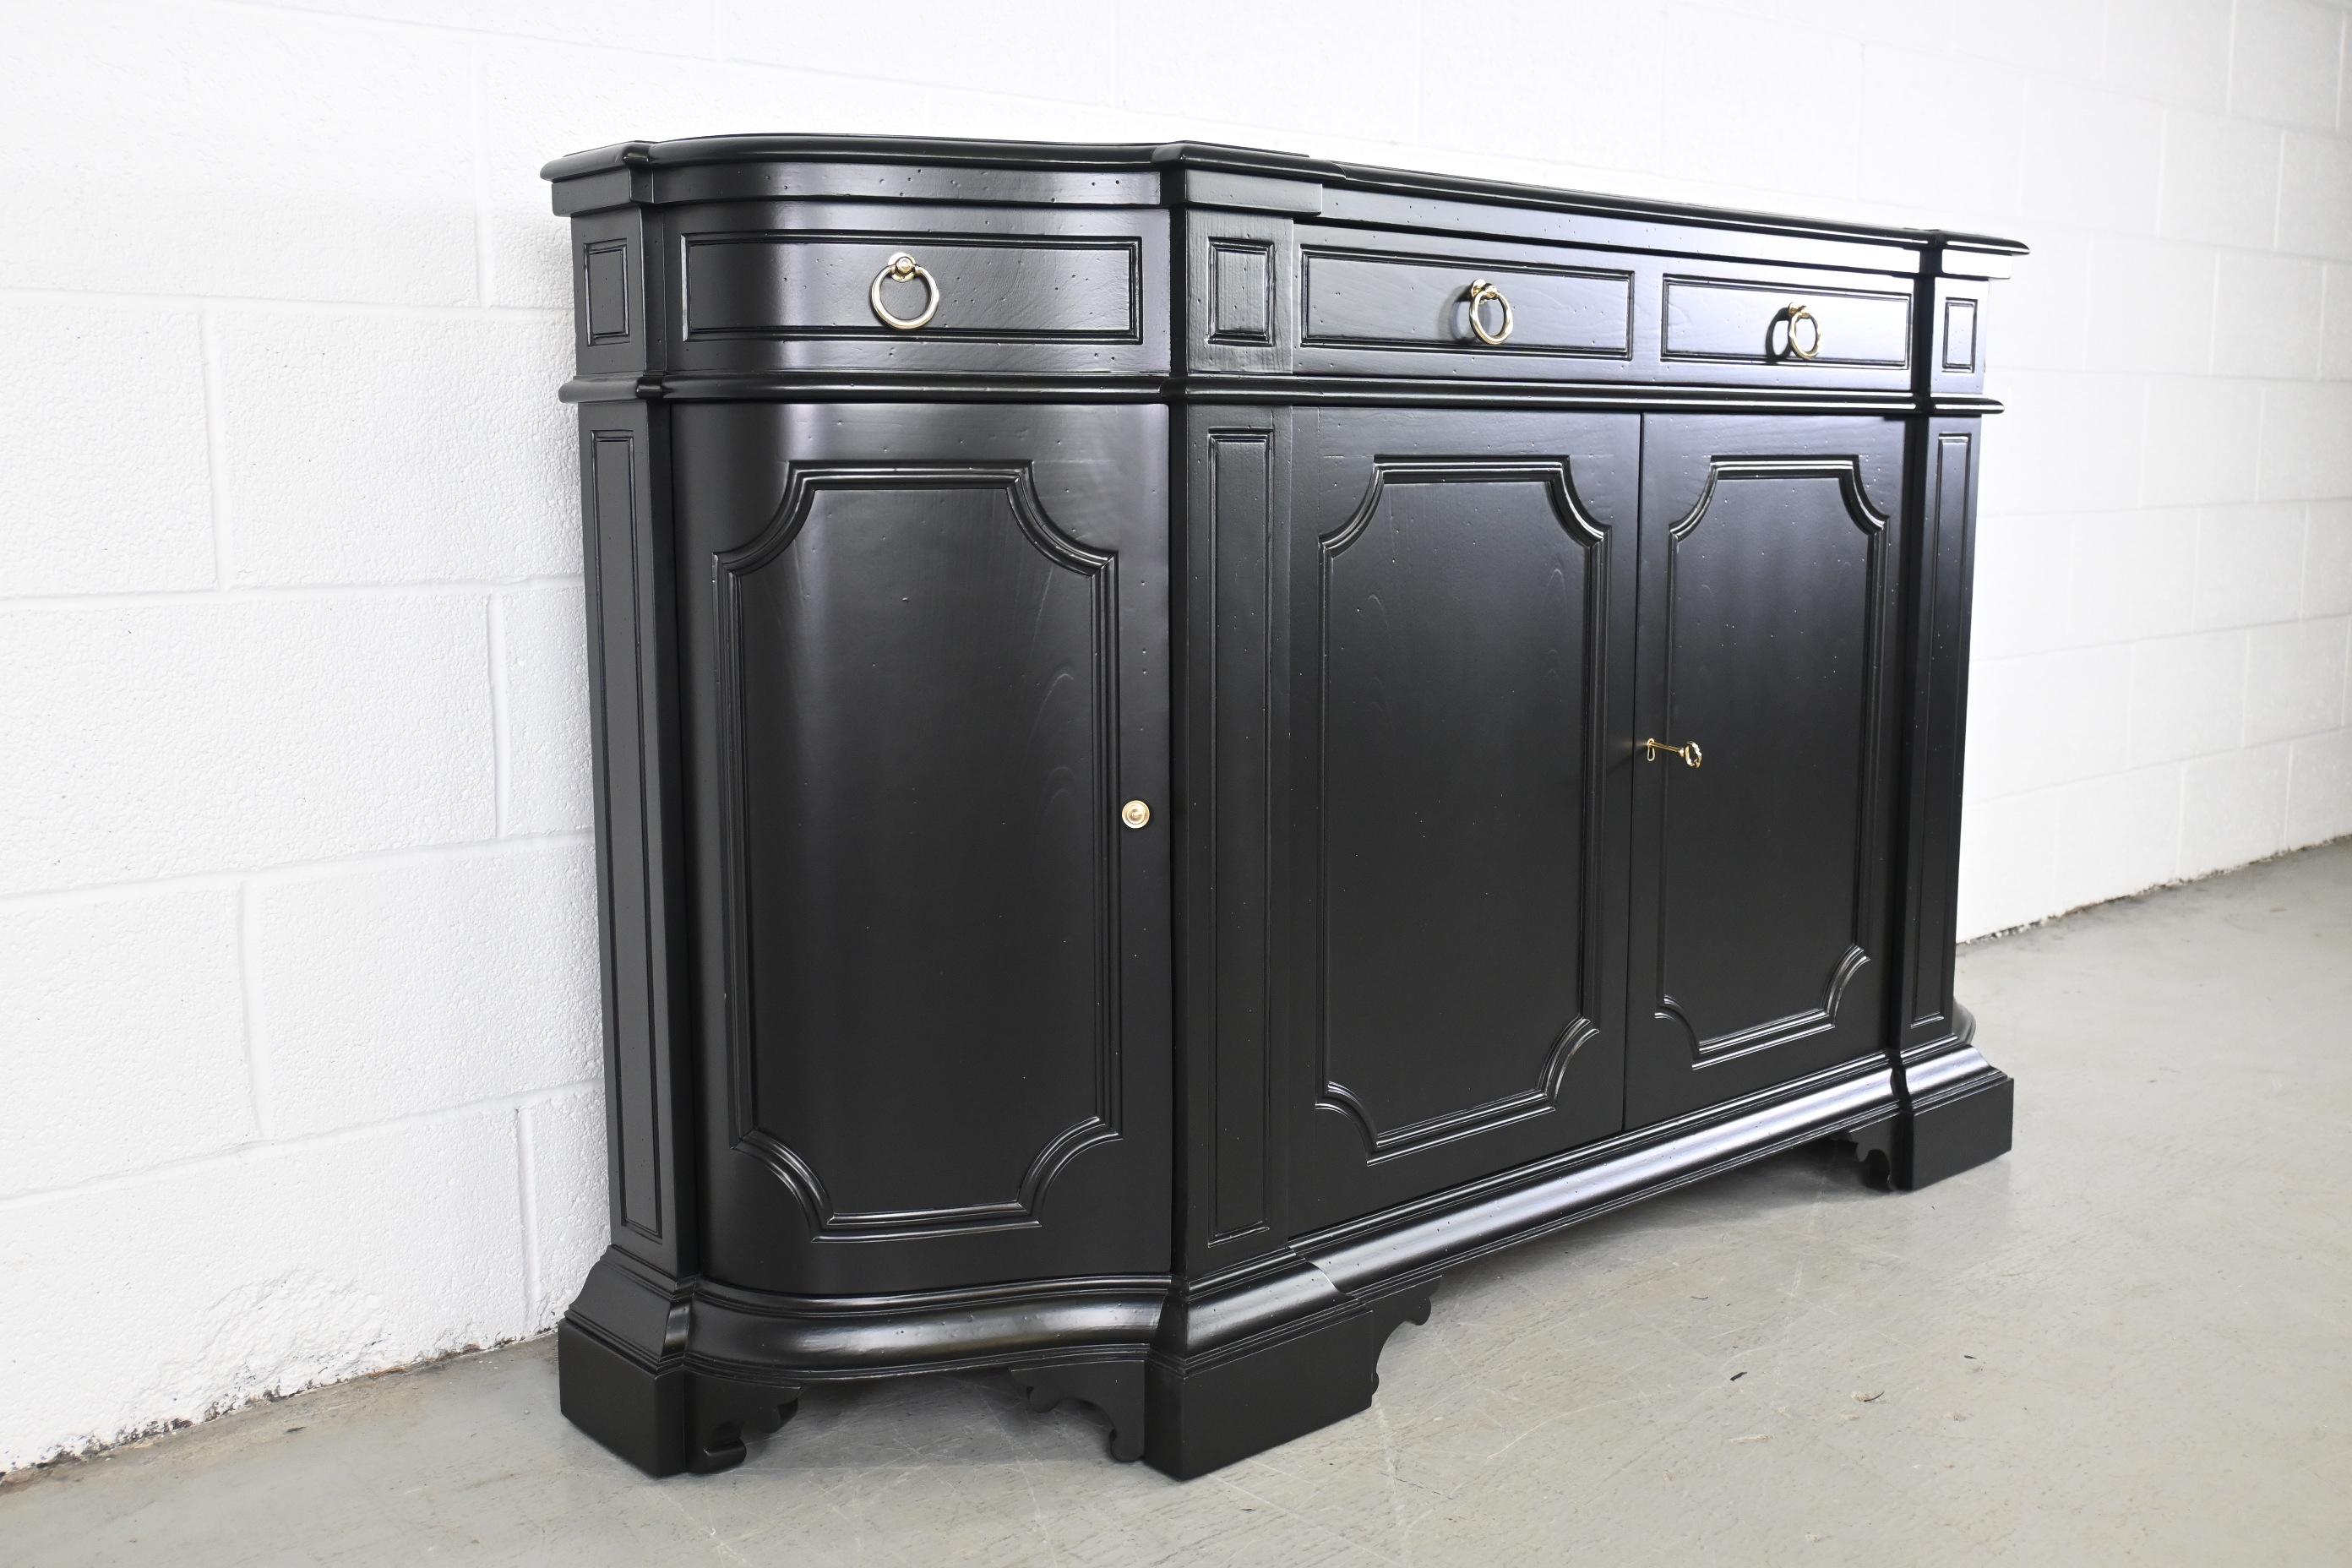 Baker Furniture Traditional Sideboard or Credenza

Baker Furniture, USA, 1980s

65.5 Wide x 14.5 Deep x 36 High.

Traditional French sideboard with three drawers and cabinet space for storage. The credenza has brass hardware, black lacquered with